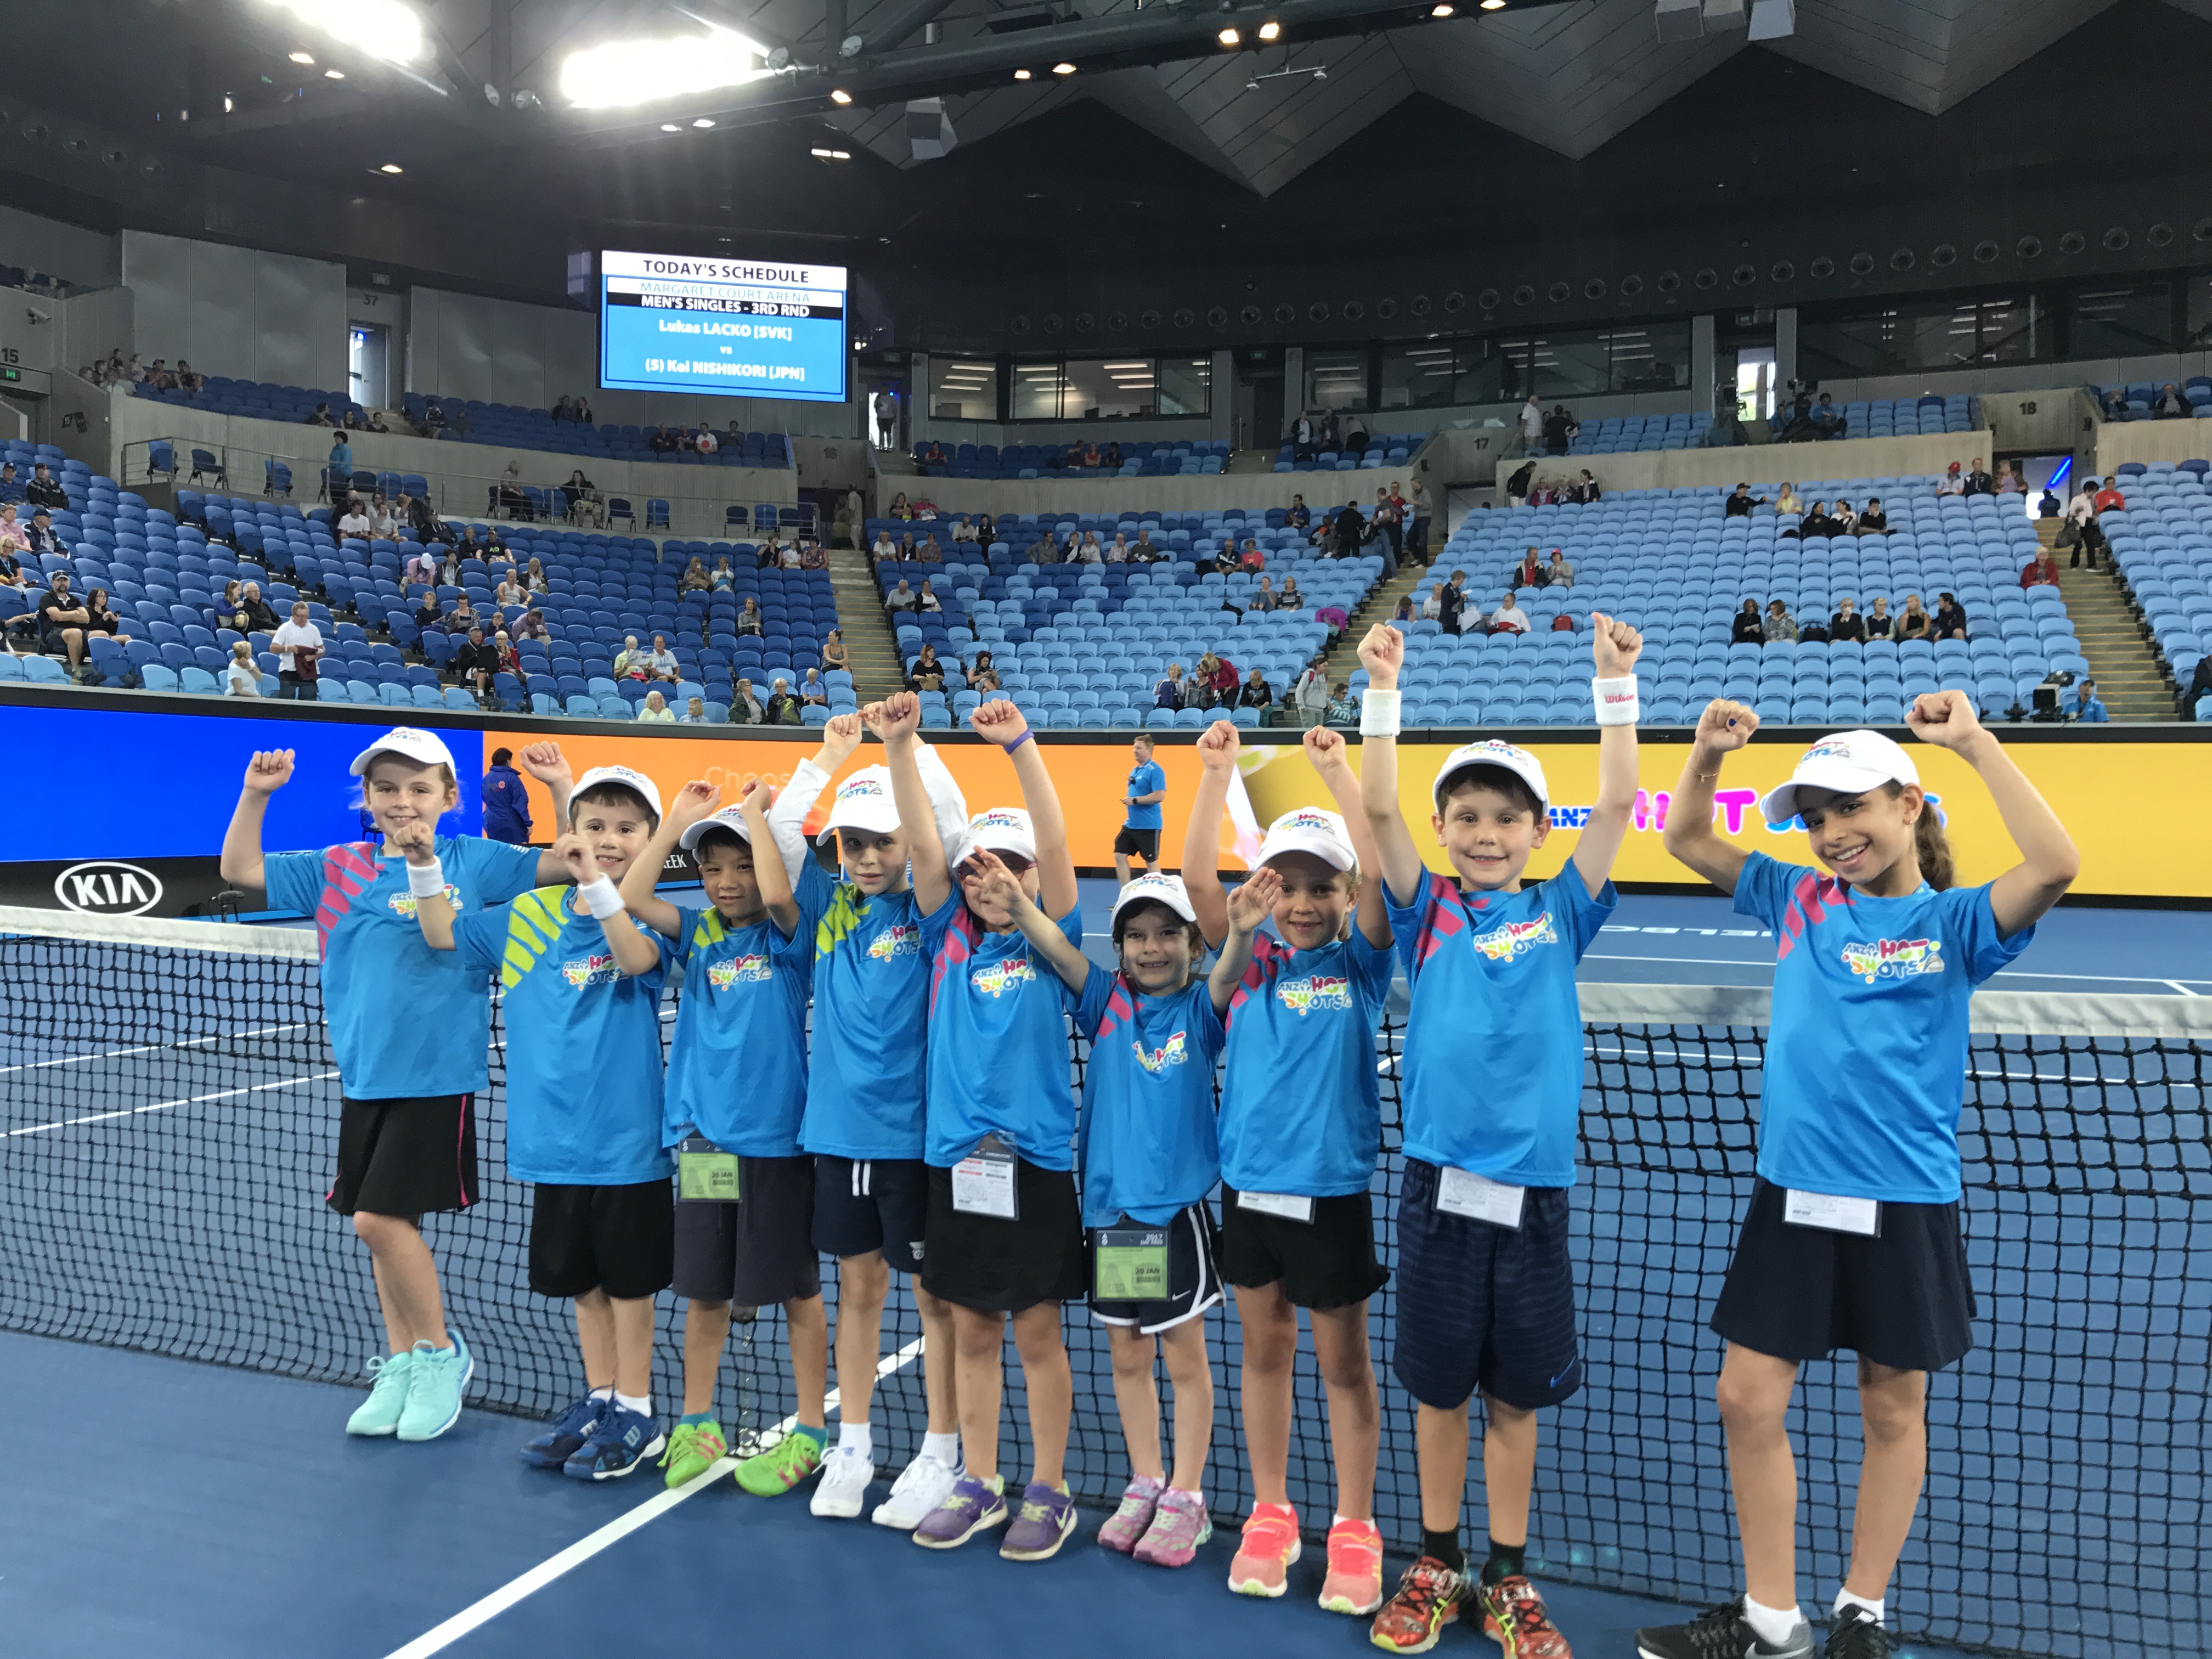 ``Muscillo tennis academy is the best tennis academy we have been to. All the staff all very motivated to build the students to their full potential. Would definitely recommend this place to anyone looking to improve their game and take it to the next level.`` - Freddie Lai